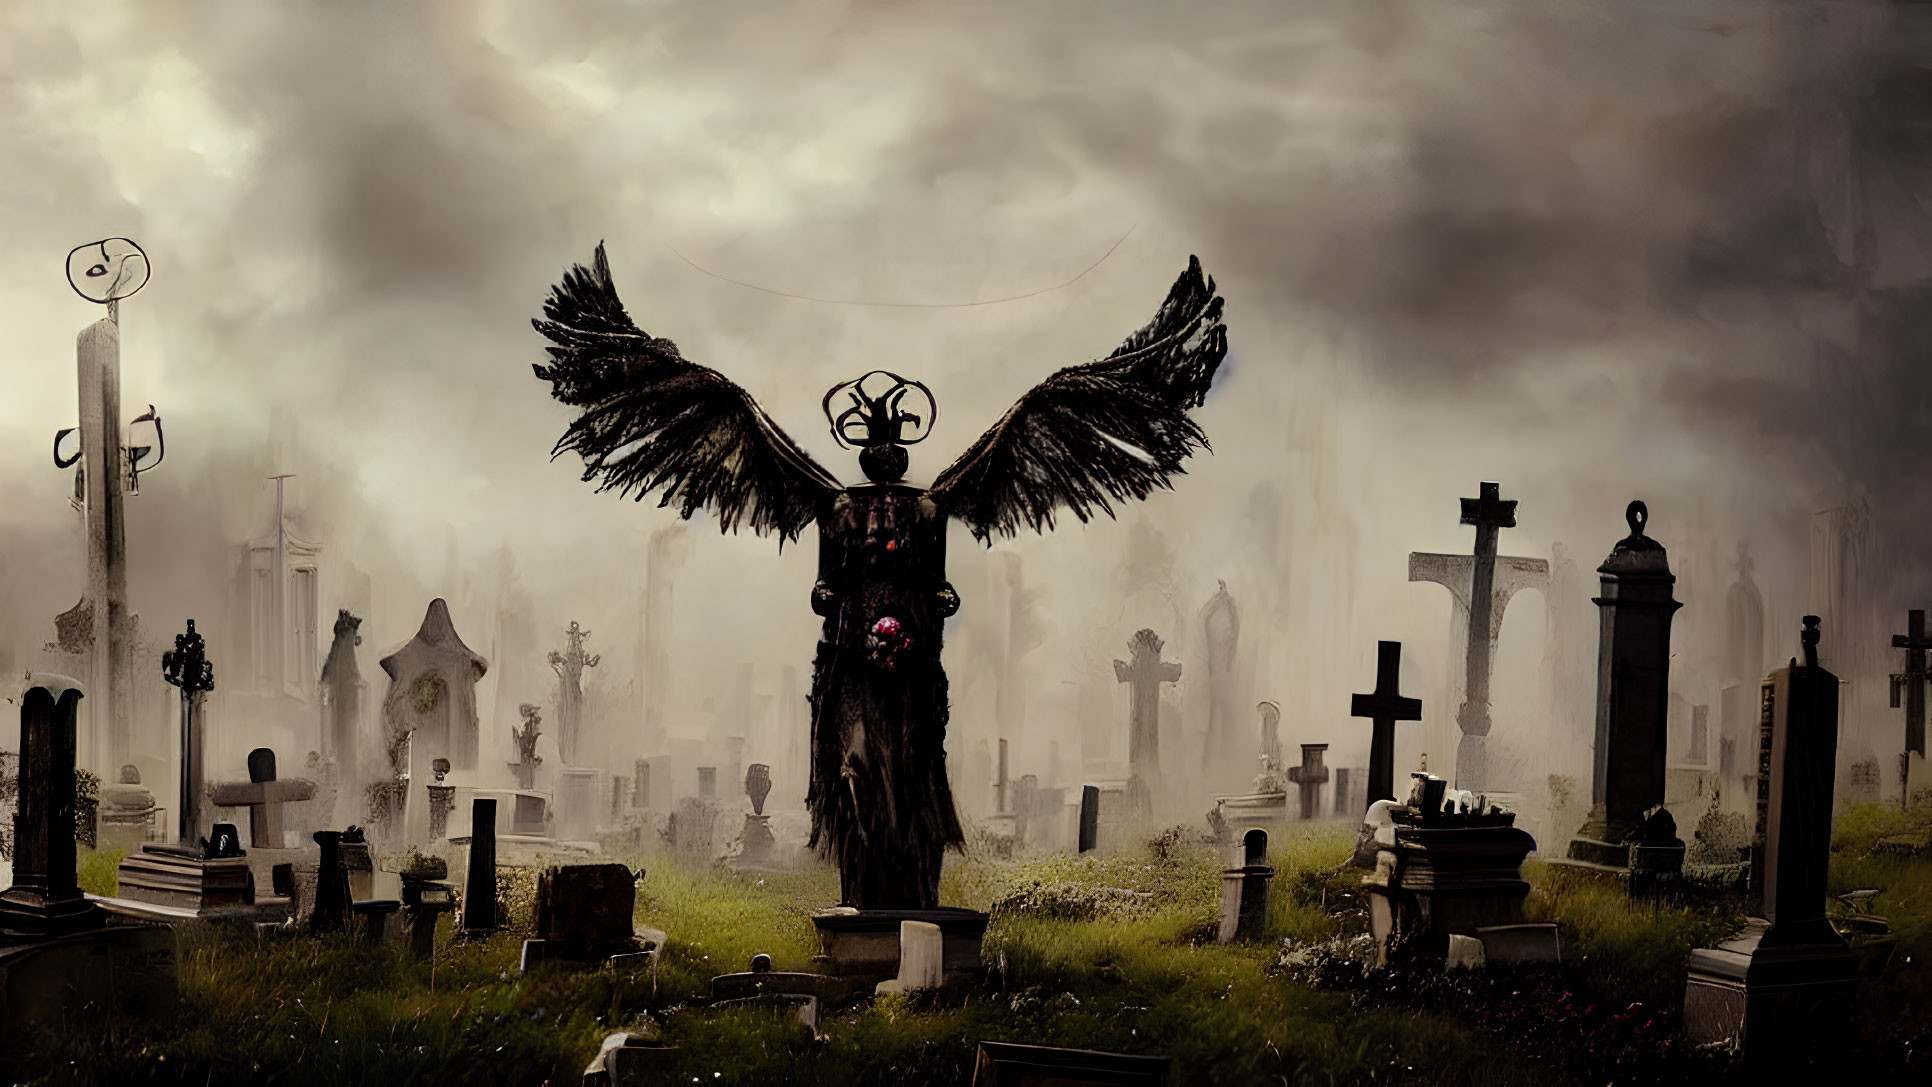 Eerie cemetery with ominous angel statue under overcast sky